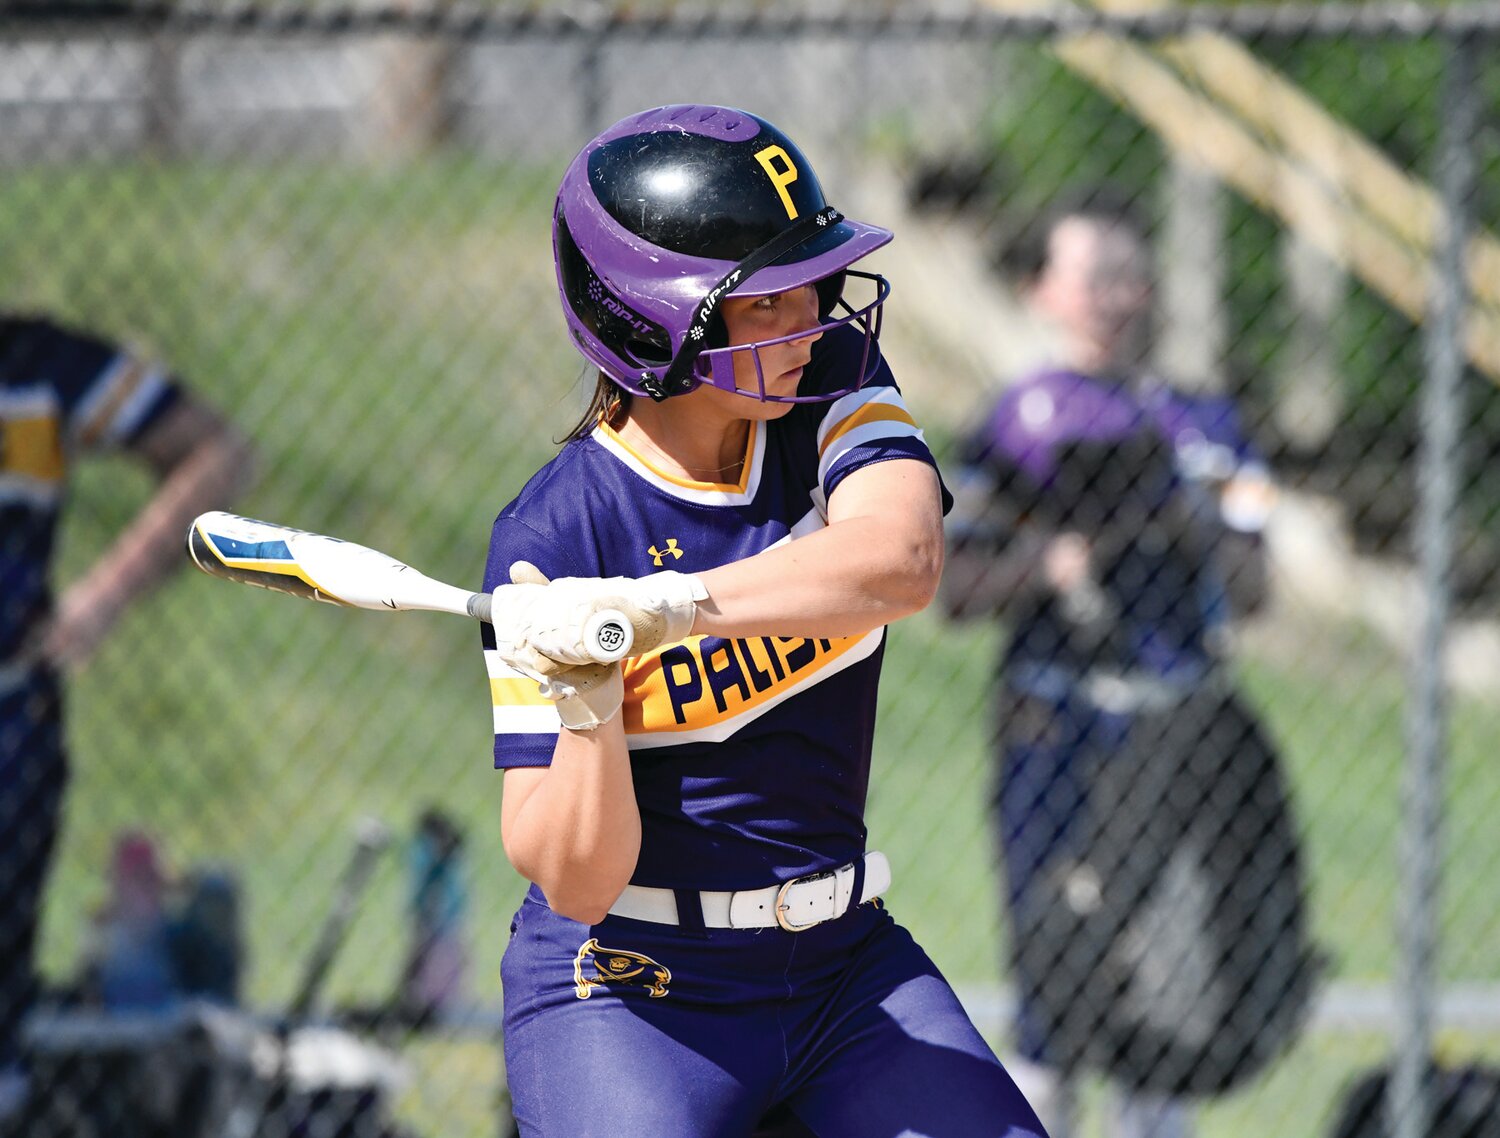 Pitcher Karlye Teman bats for the Pirates during last Friday’s 11-1 thumping of Nativity.